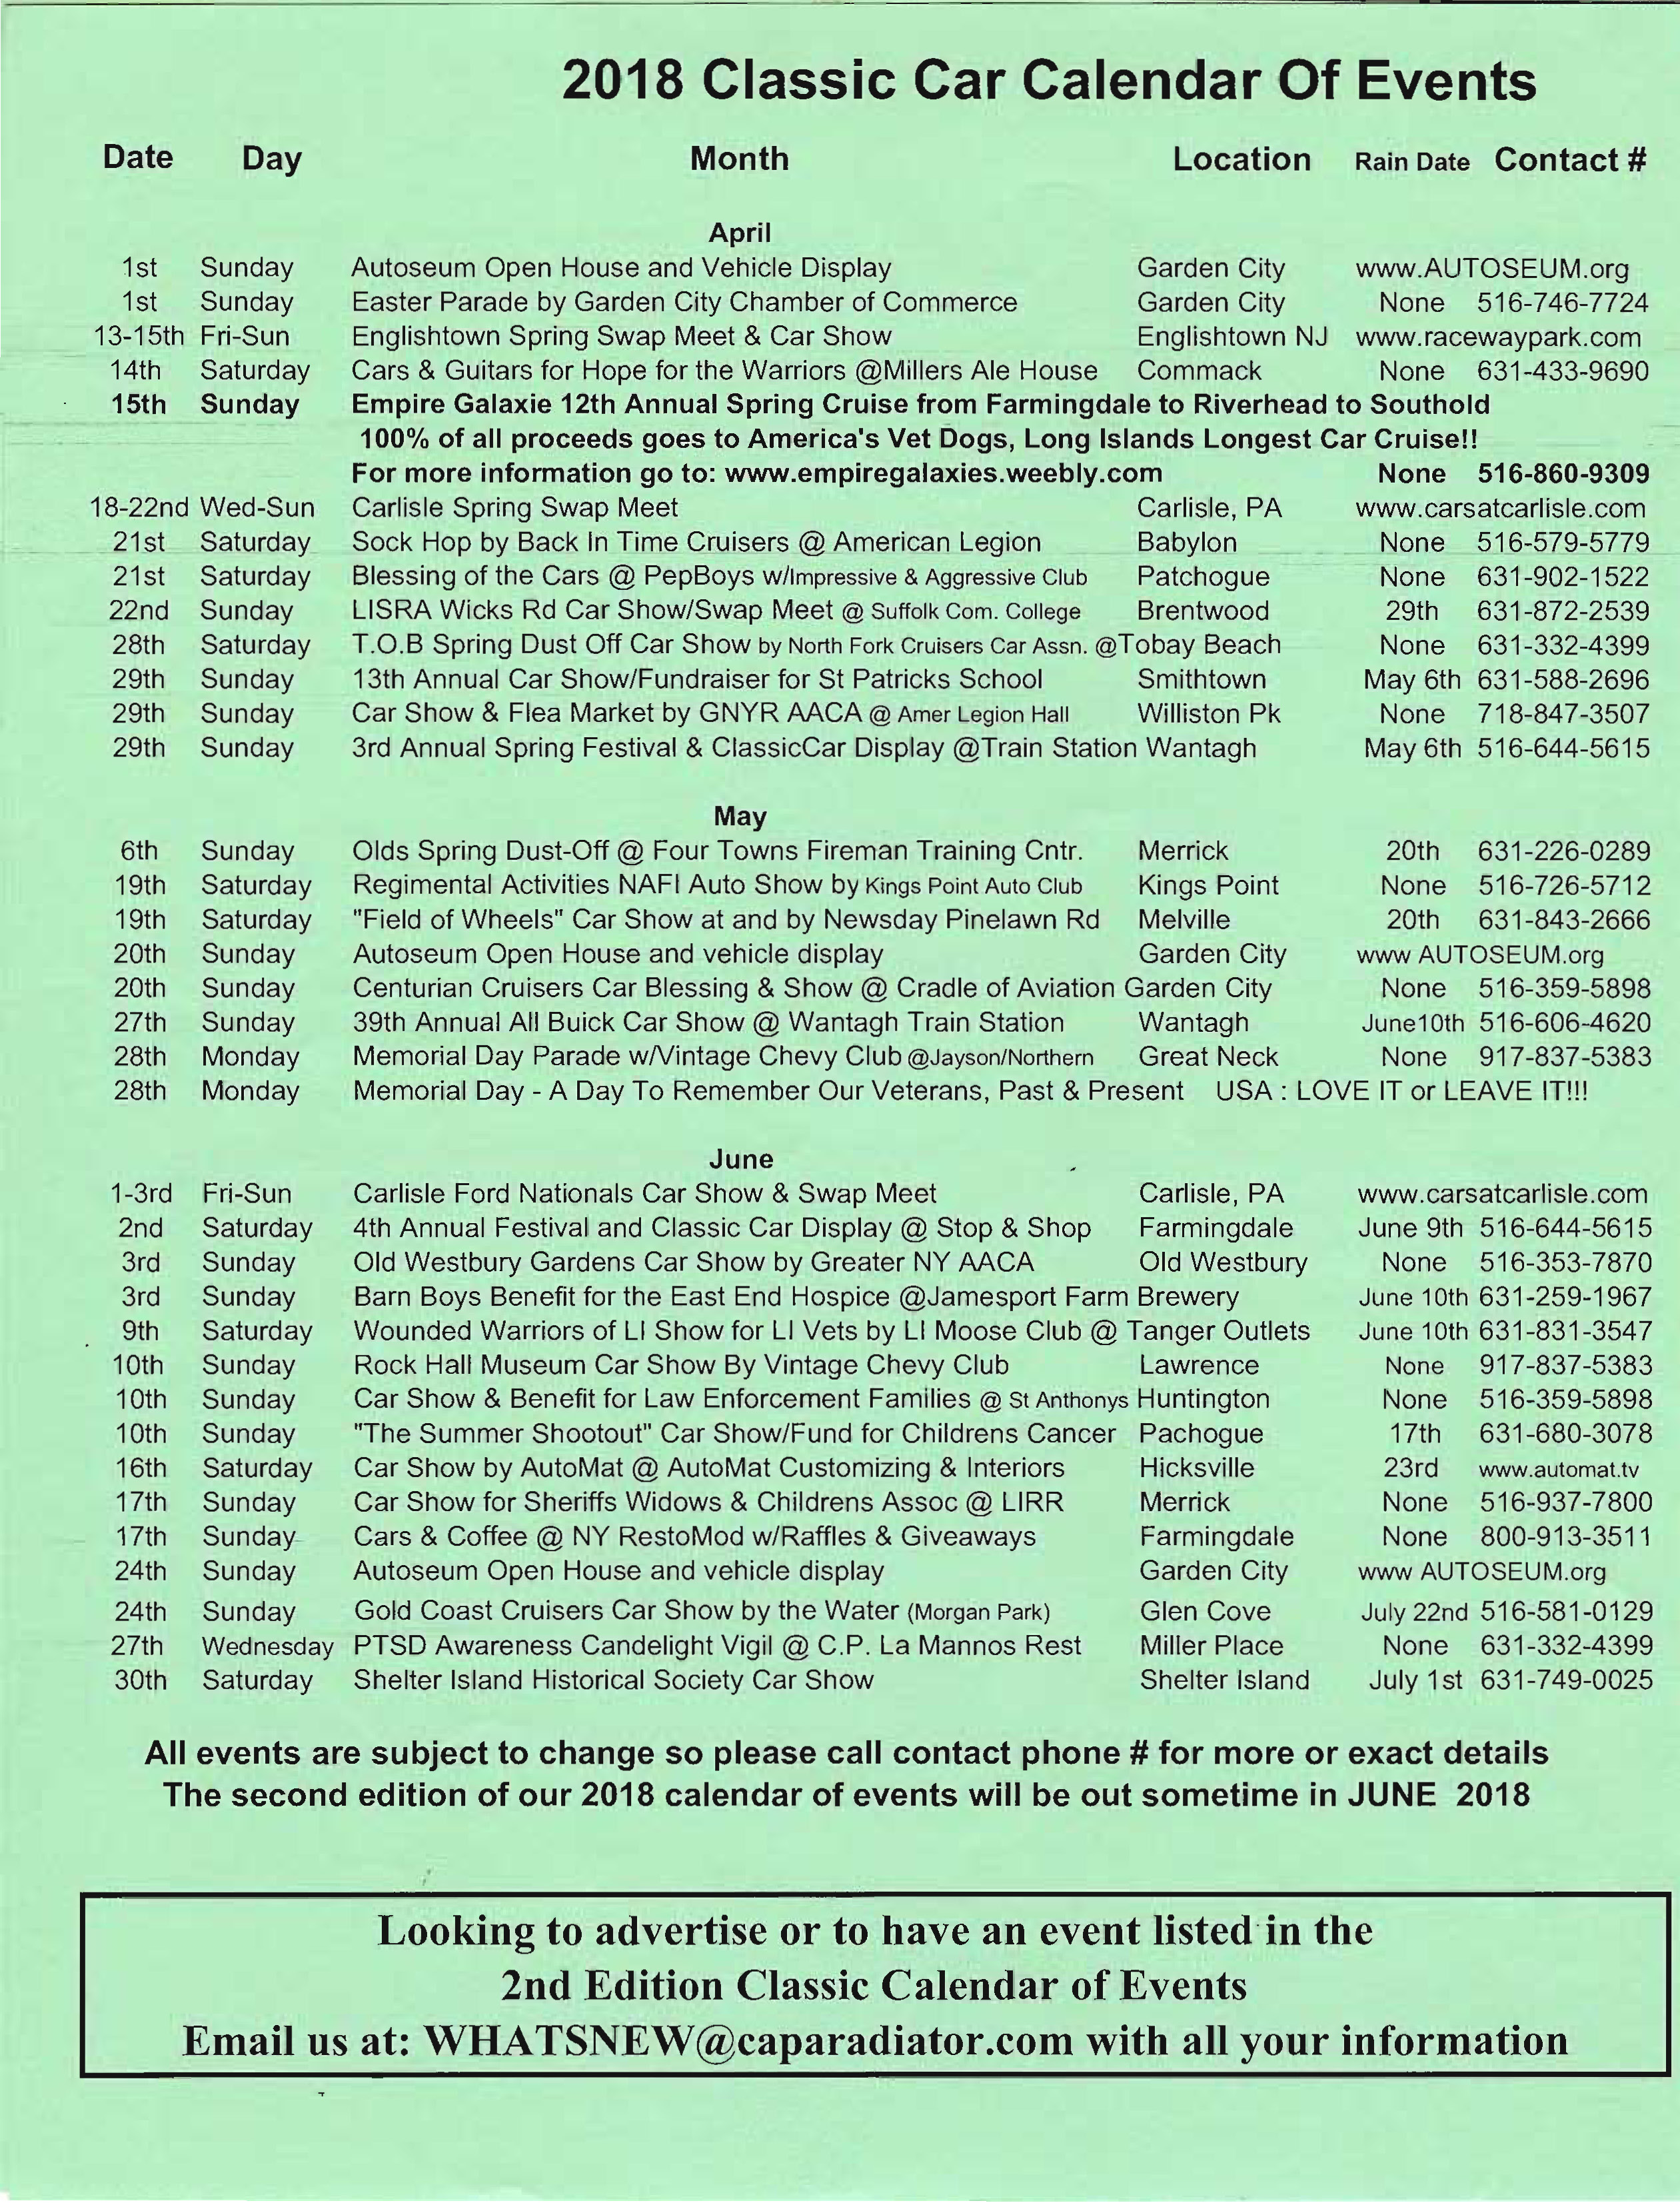 2018 Classic Car Calendar of Events First Edition through July Page 2